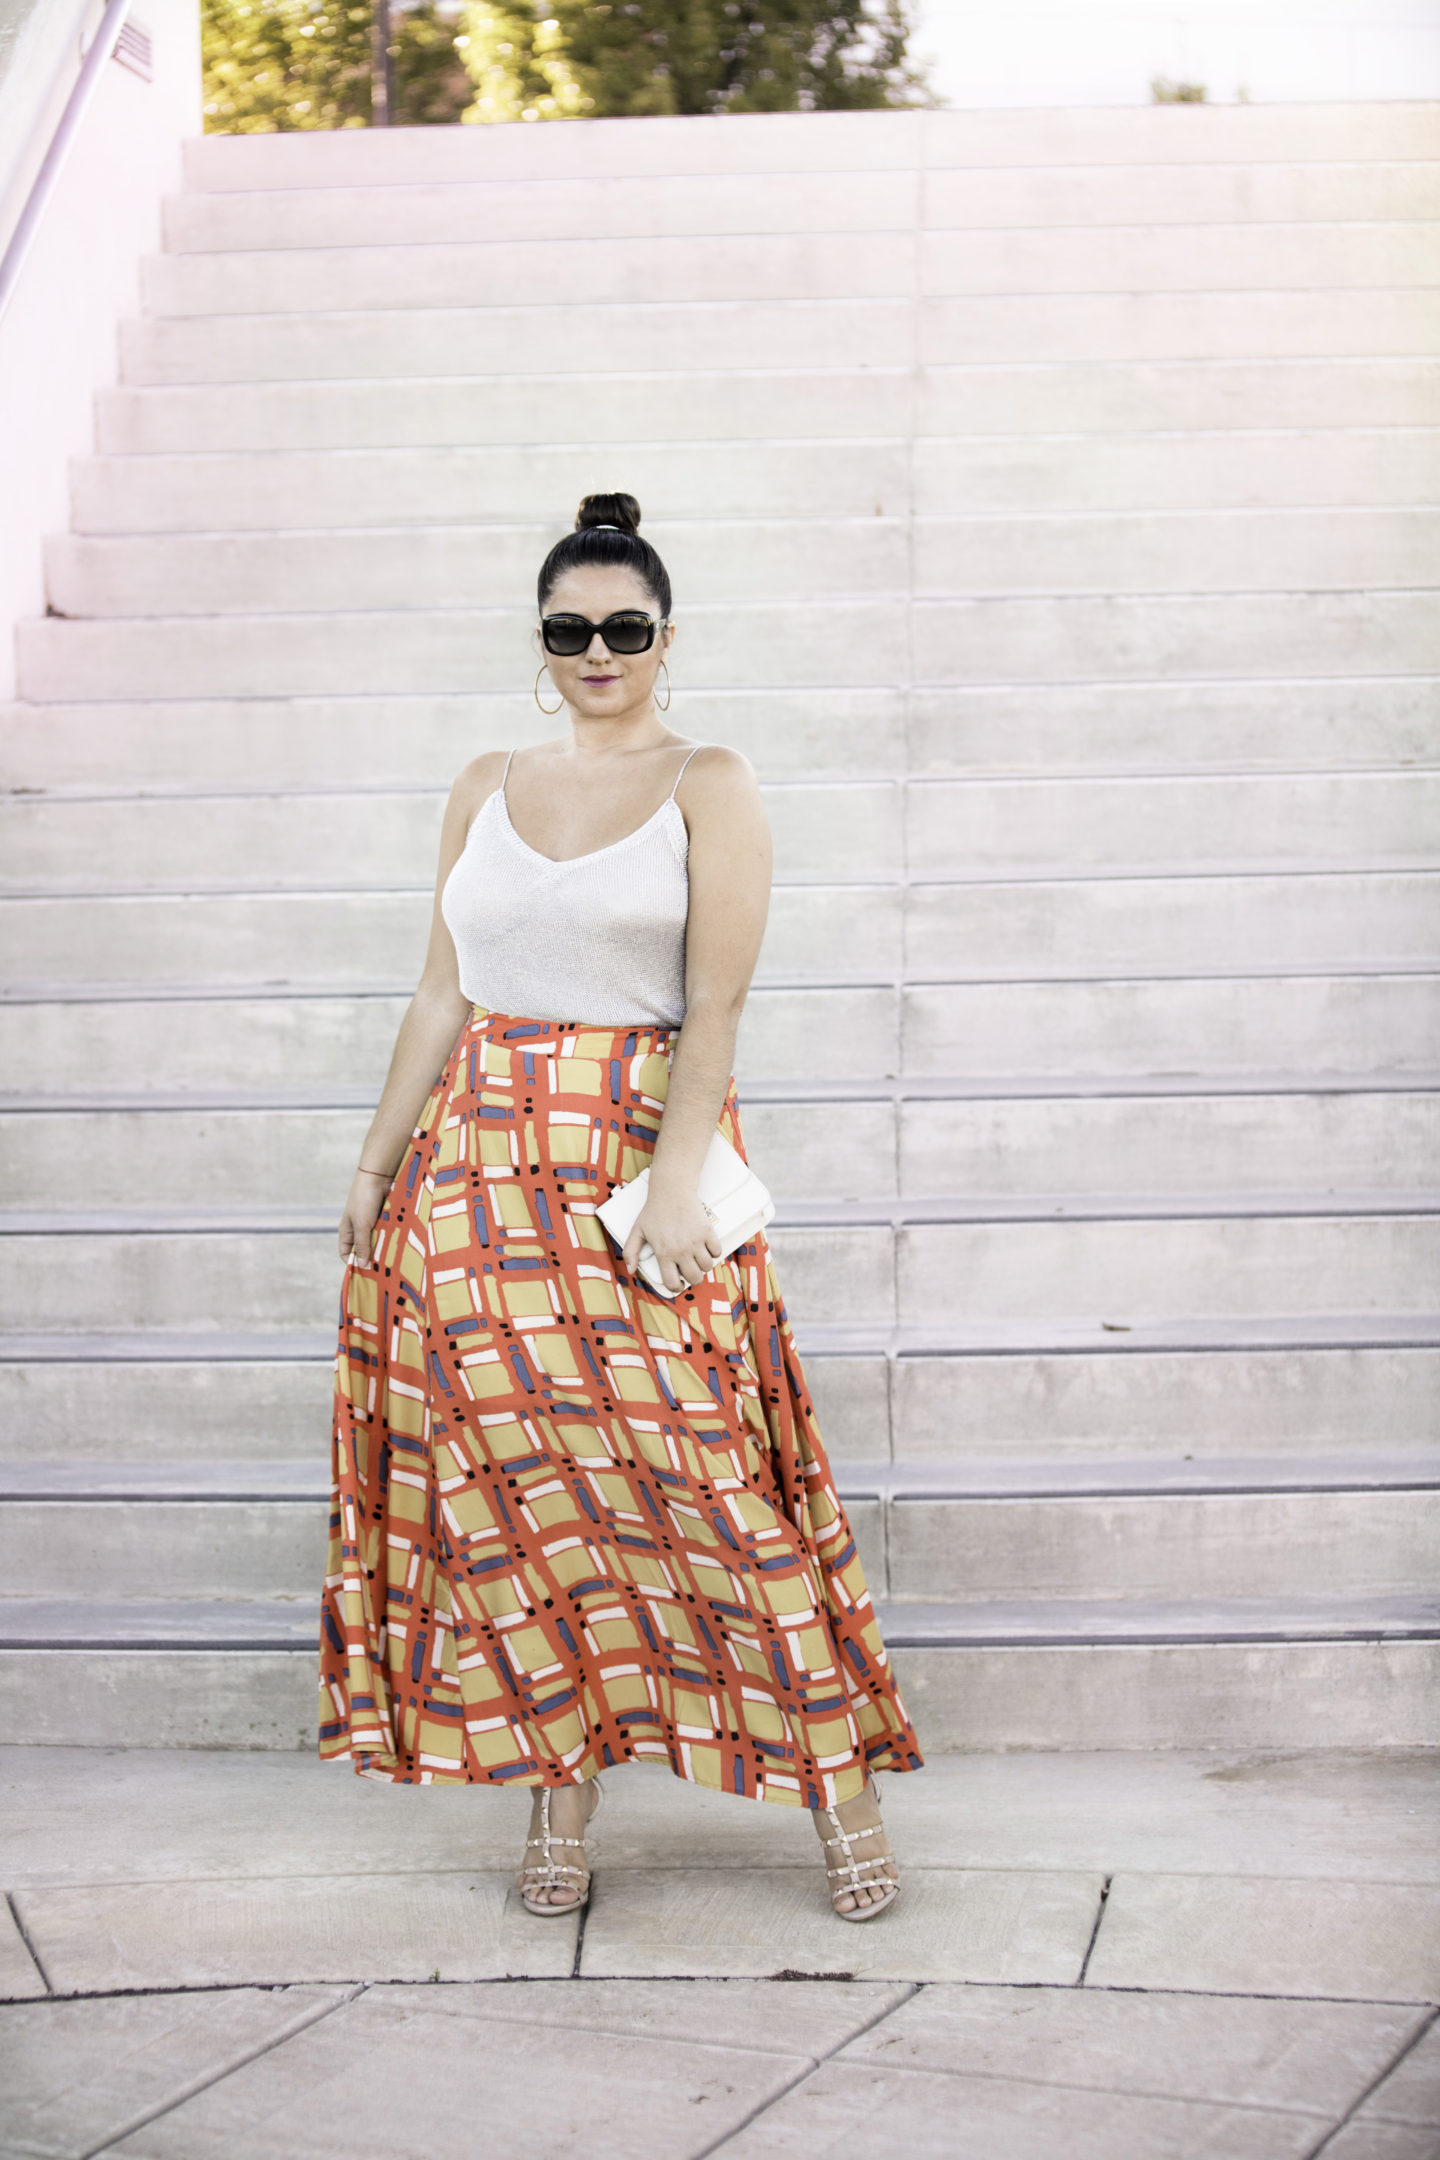 styling a maxi skirt